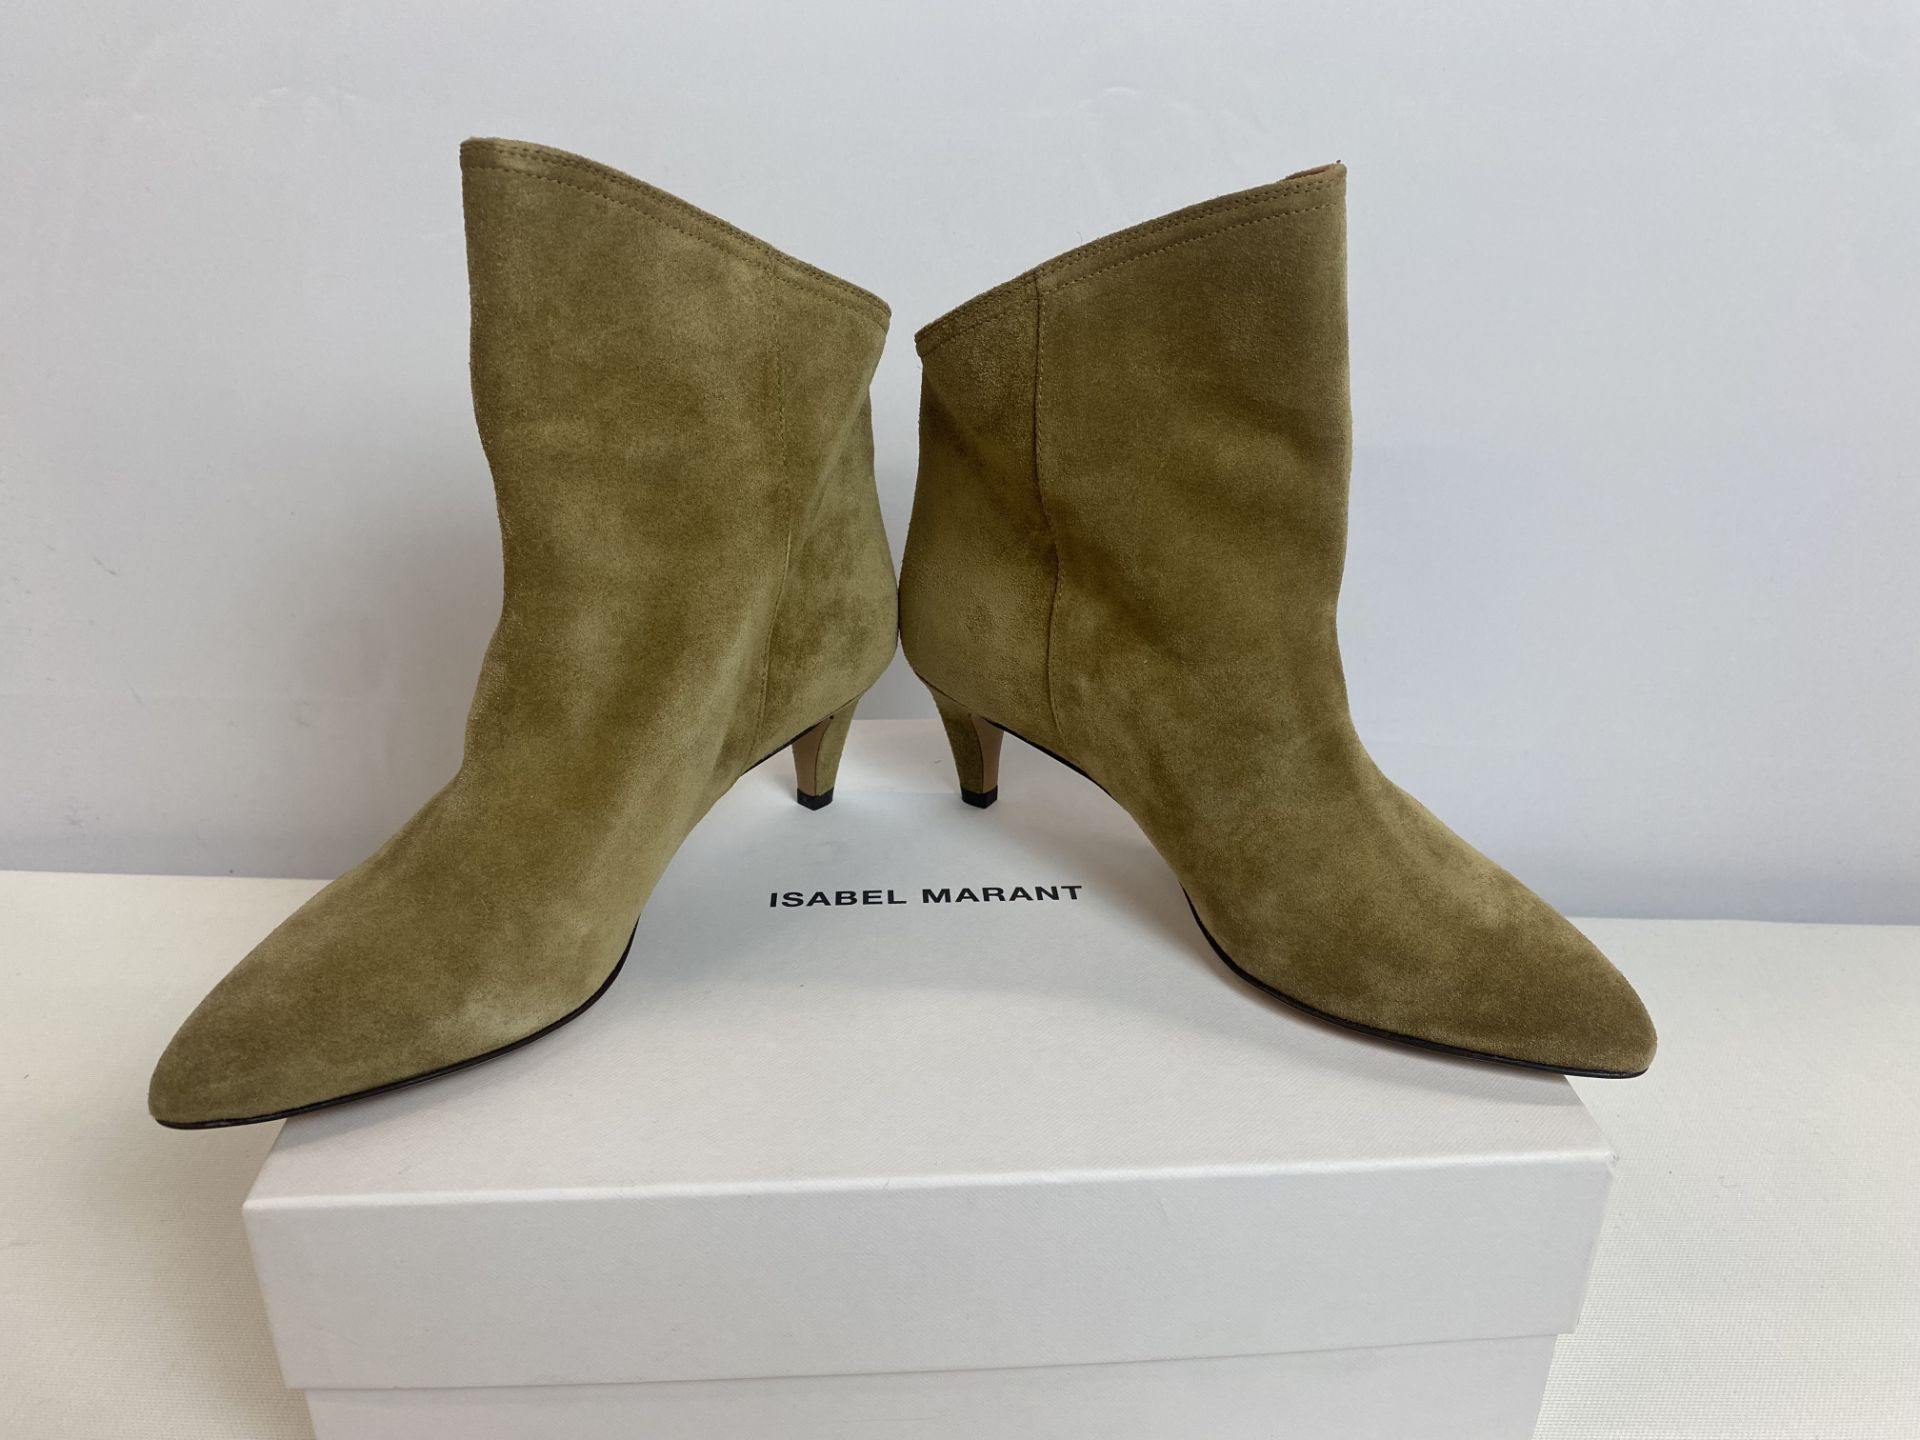 Isabel Marant Bootie dripi ANSUEDE CITY BOOT, Size: 37, Color: BEIGE, Retail Price: $770 - Image 3 of 4